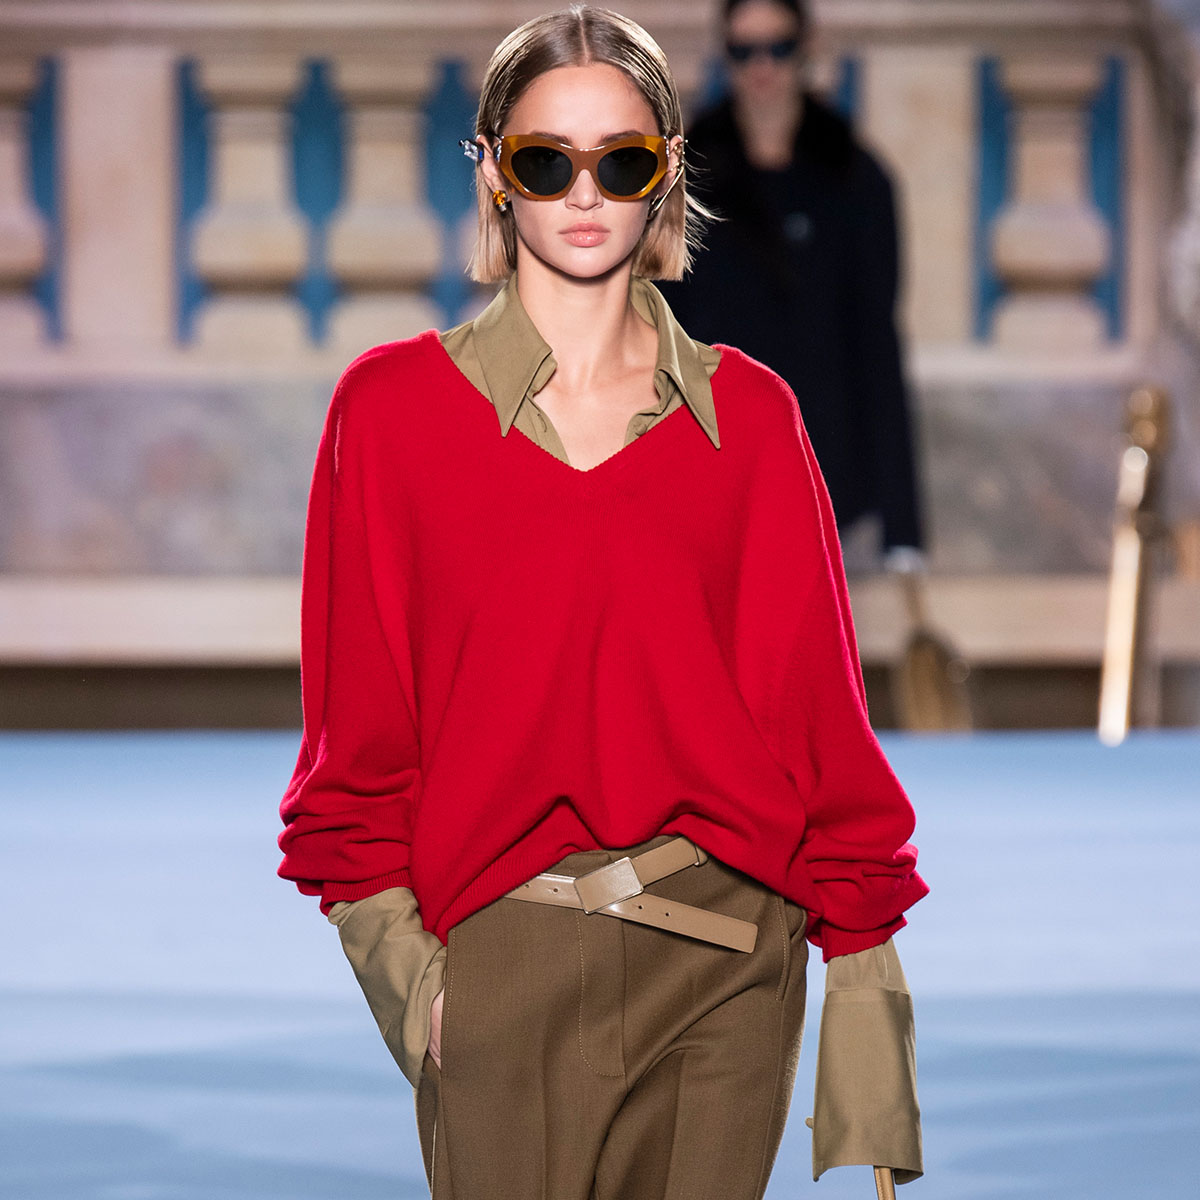 Here's How to Wear Fall's Biggest Color Trend